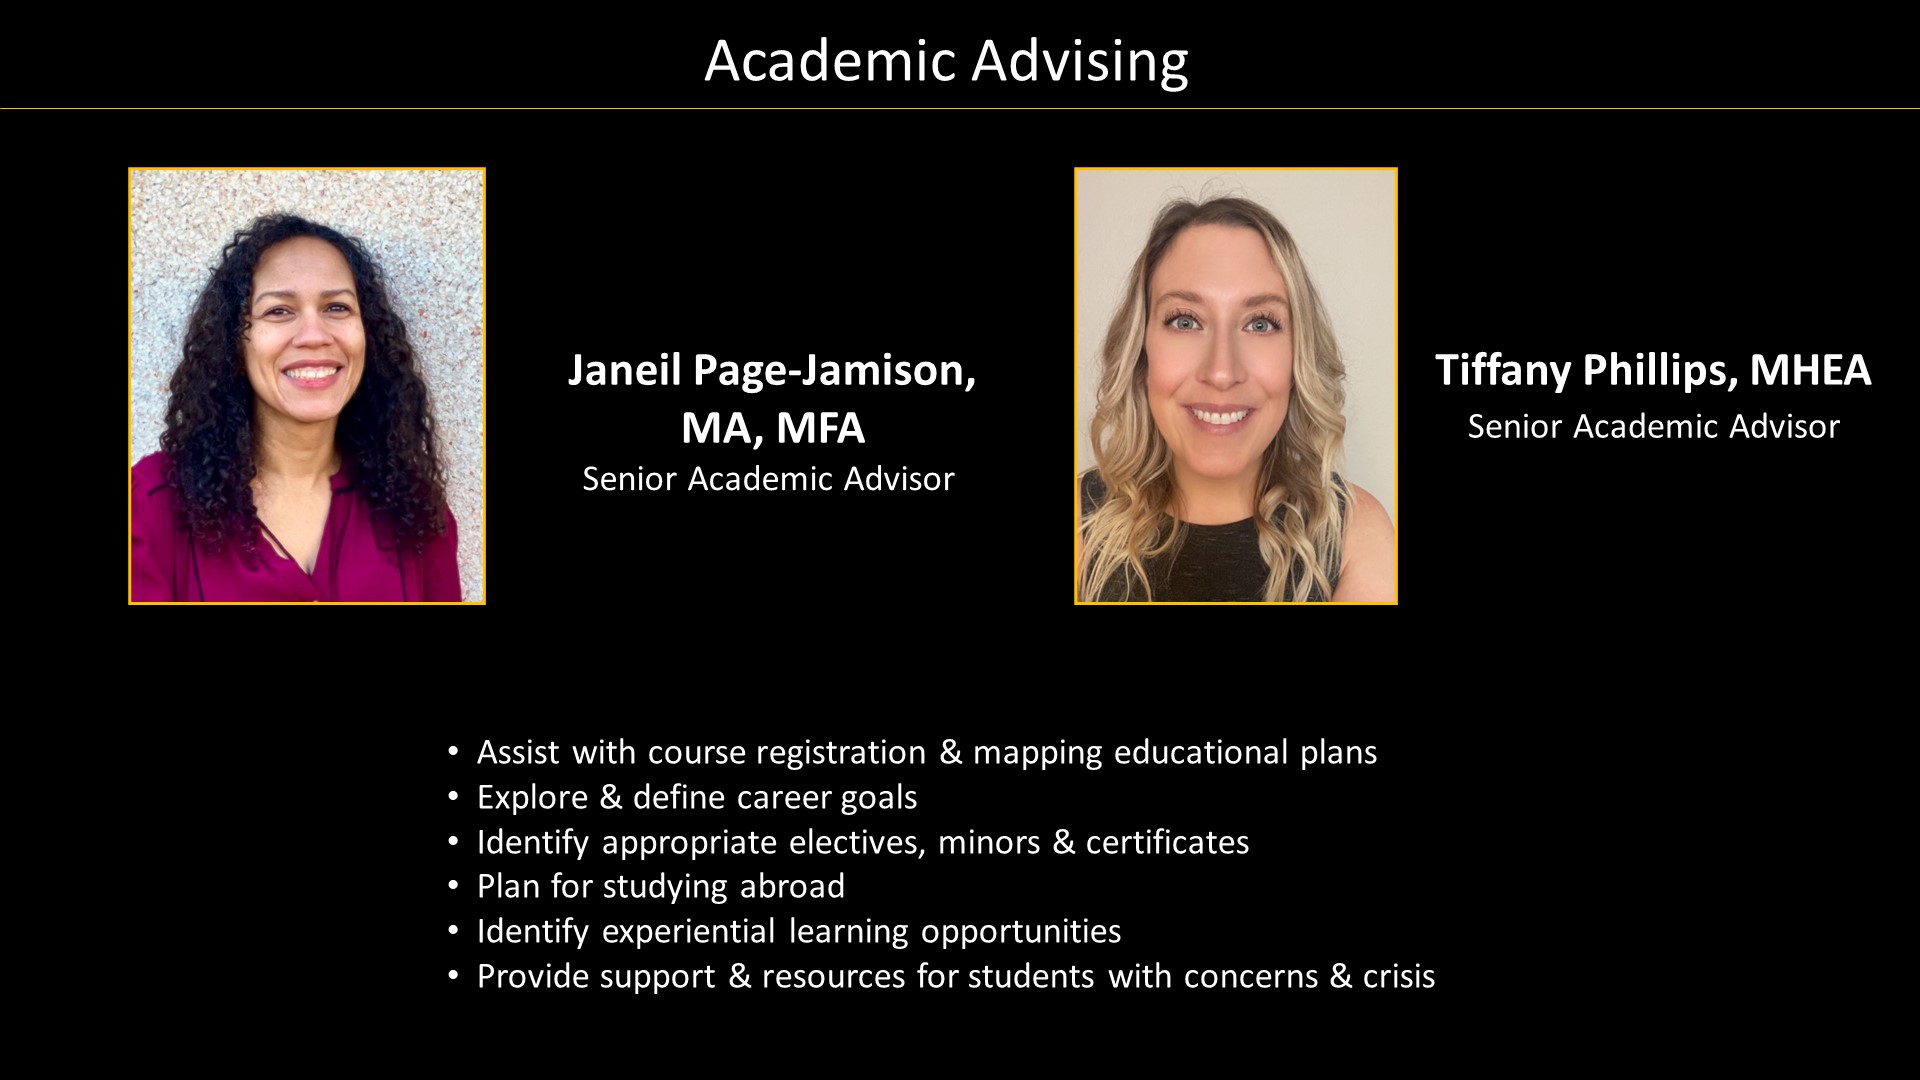 Academic Advising Staff Janeil Page-Jamison and Tiffany Phillips Profile with Photo